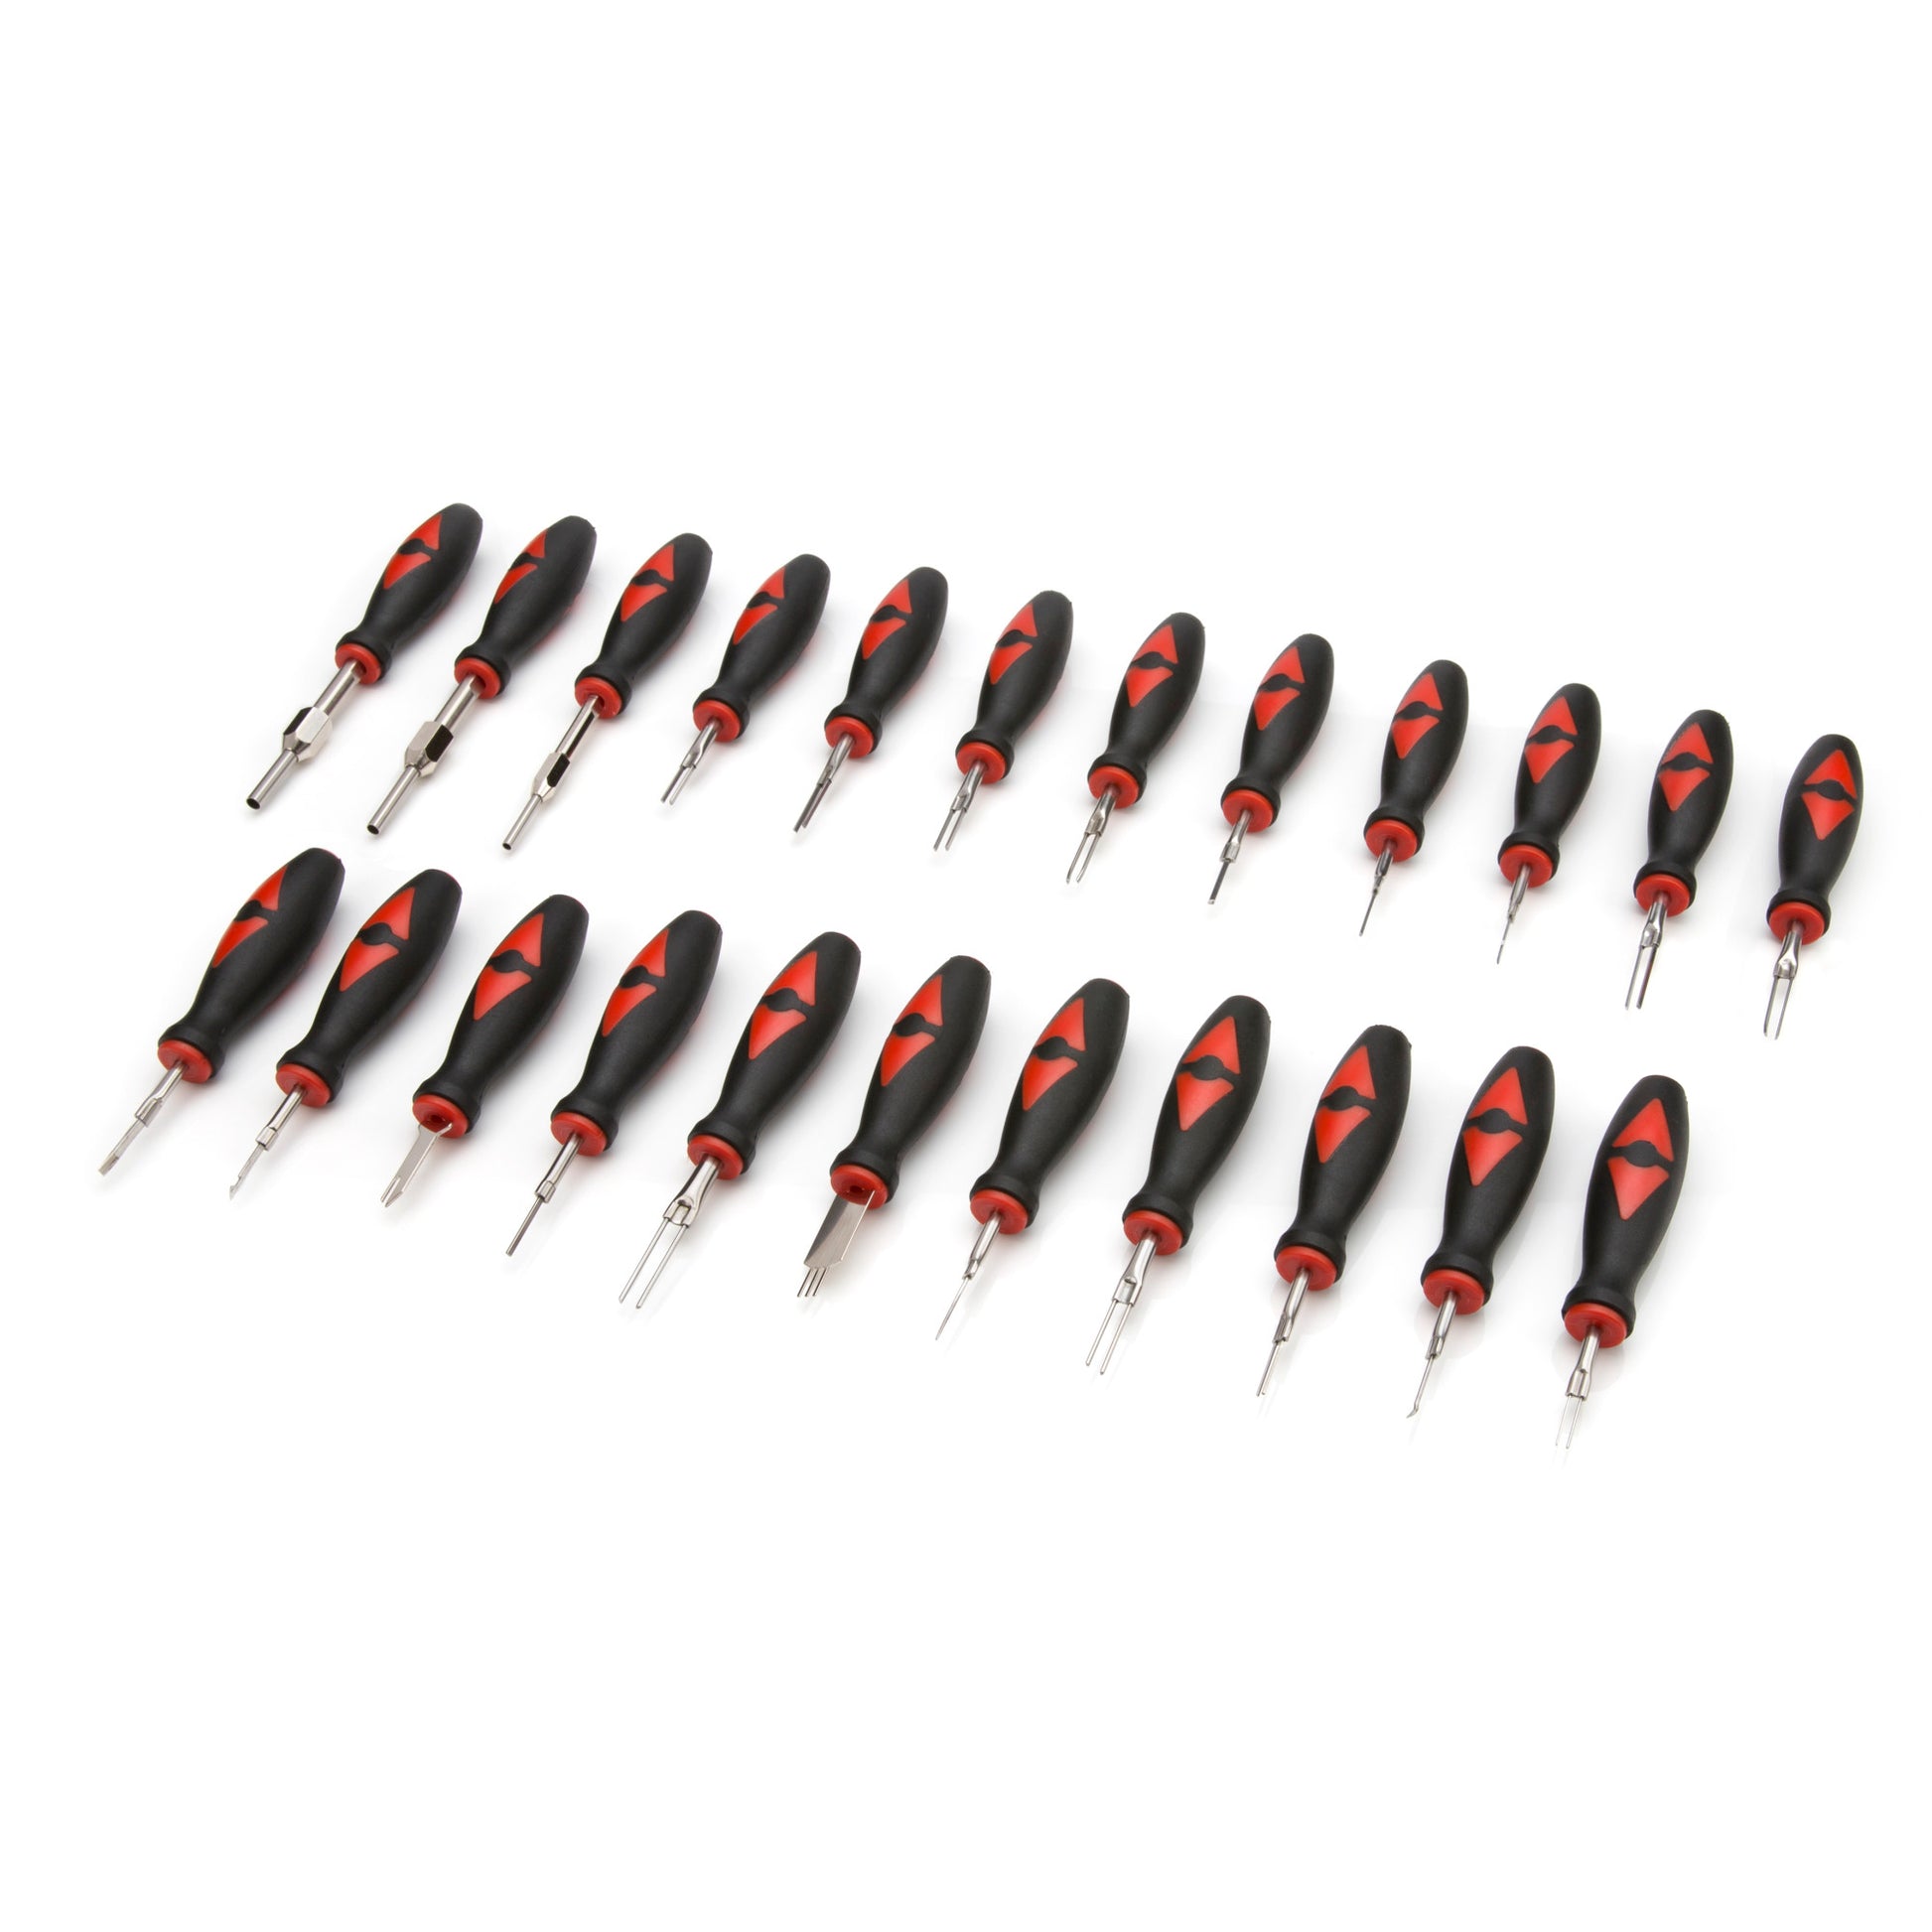 Linkstyle 82 Pcs Terminal Removal Tool Kit For Car, Auto